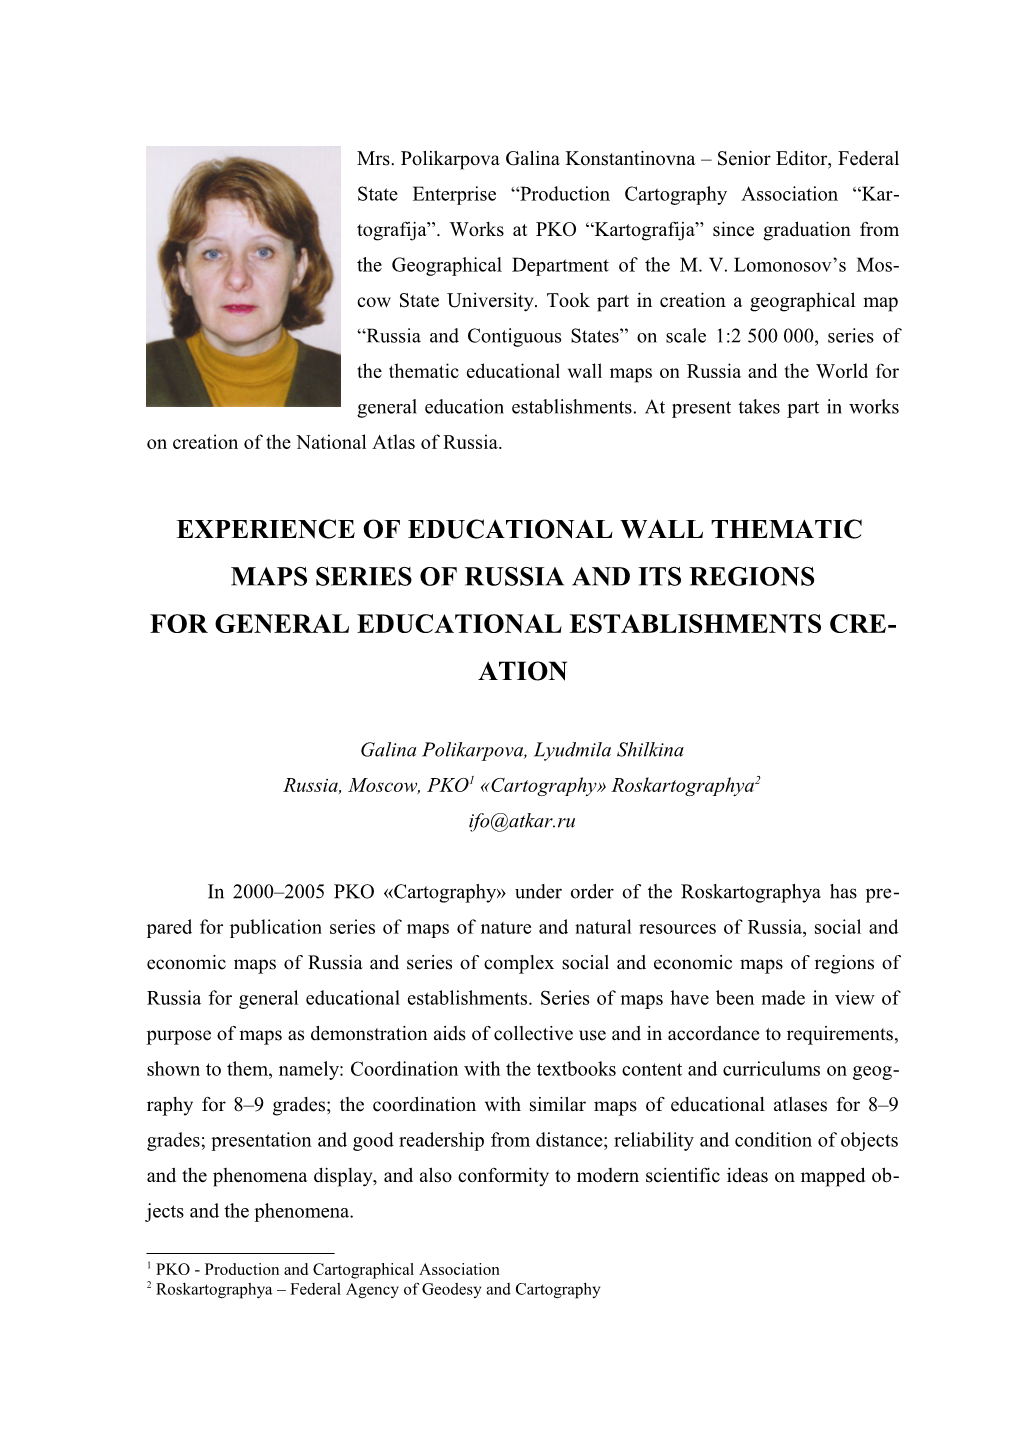 Experience of Educational Wall Thematic